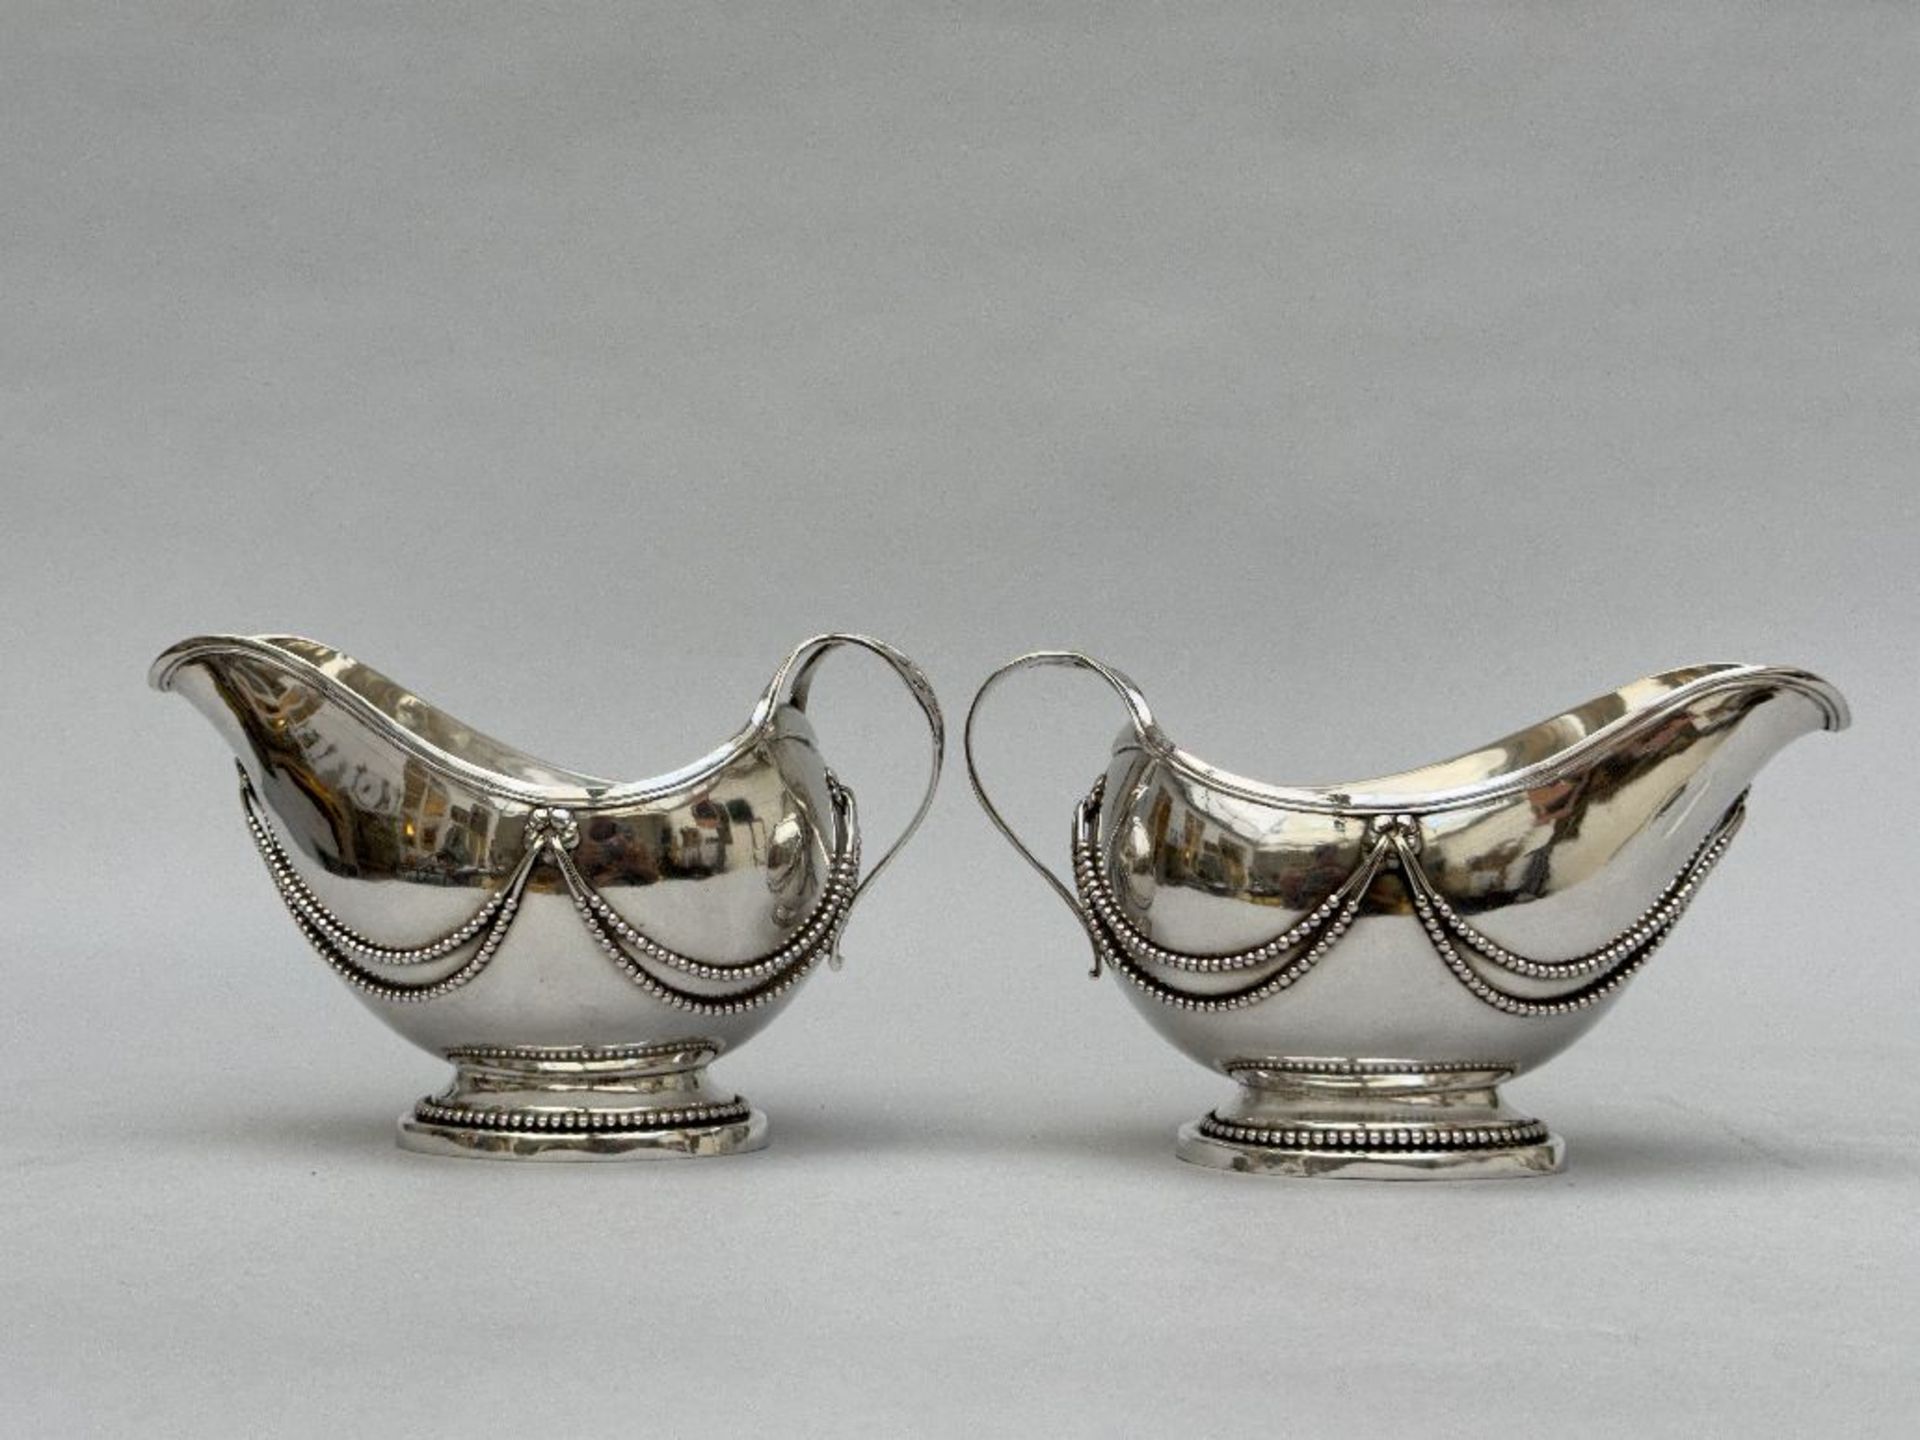 A pair of silver sauce boats by Nicolaes Vleeshouwers, Antwerp 1792 - Image 8 of 9